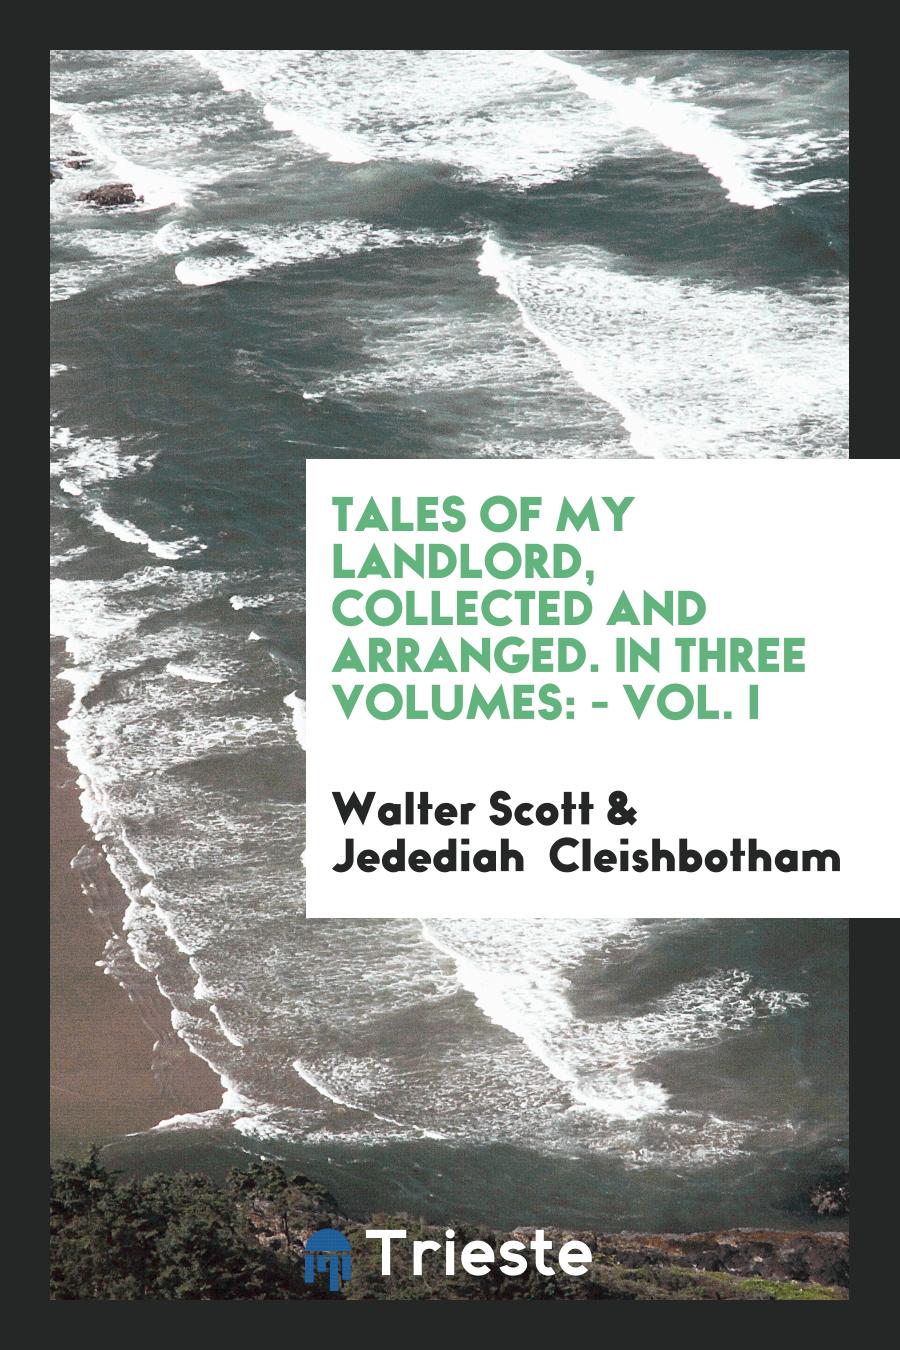 Tales of My Landlord, Collected and Arranged. In Three Volumes: - Vol. I